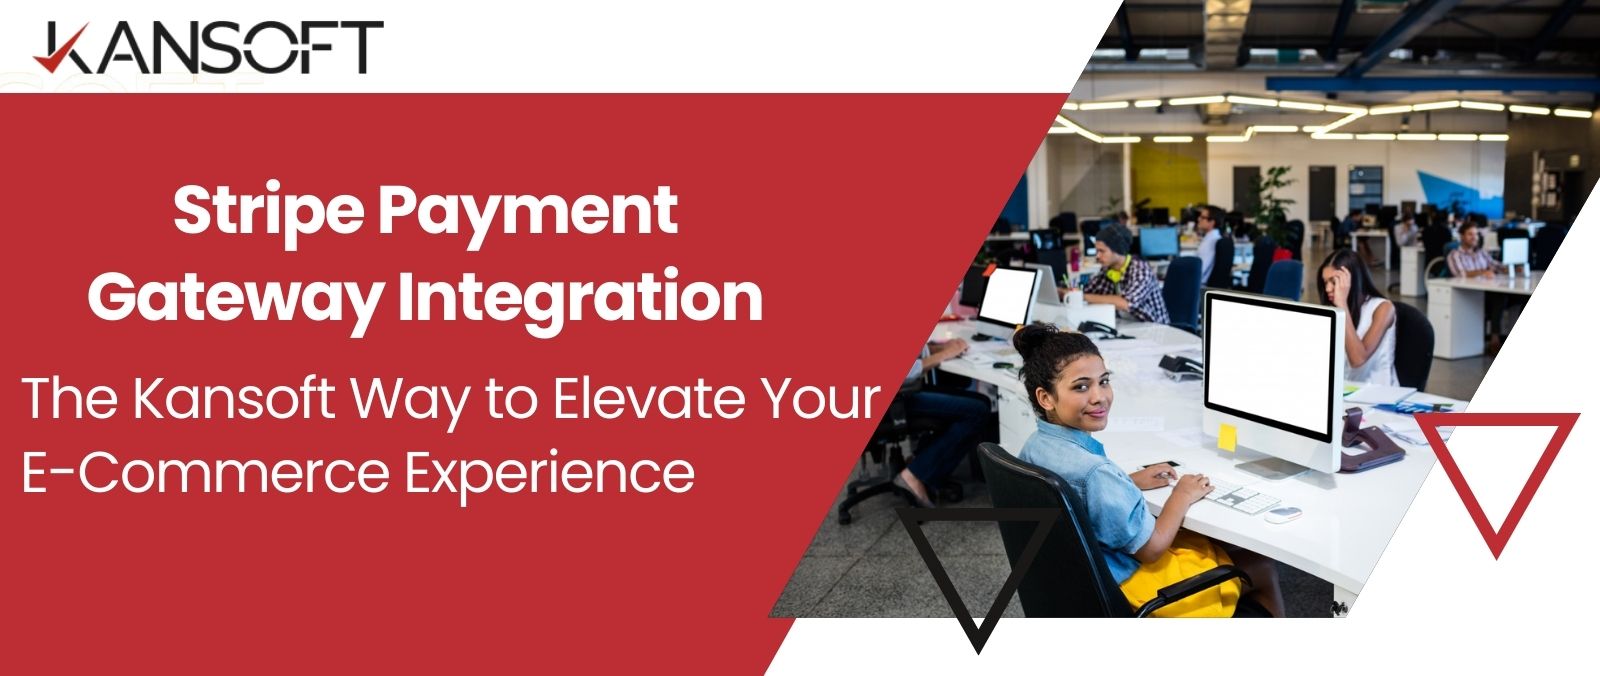 Stripe Payment Gateway Integration: The Kansoft Way to Elevate Your E-Commerce Experience